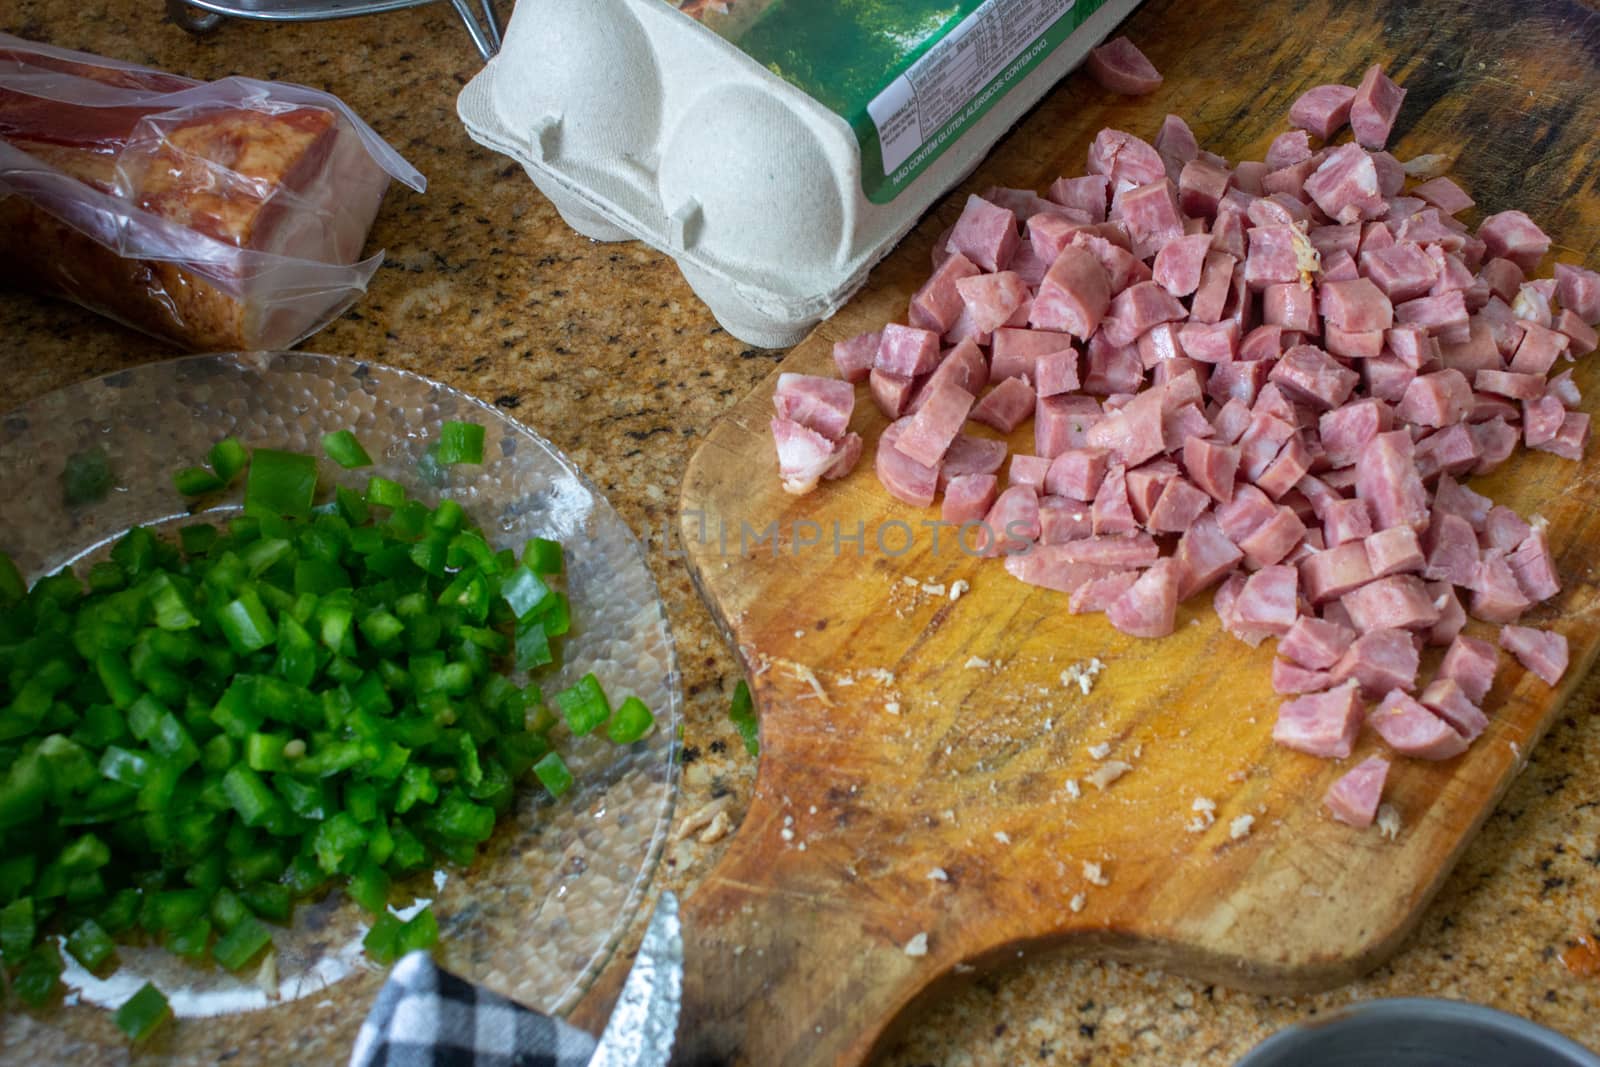 Preparation of a Brazilian meal, with sliced pork sausage, parsley, eggs and bacon